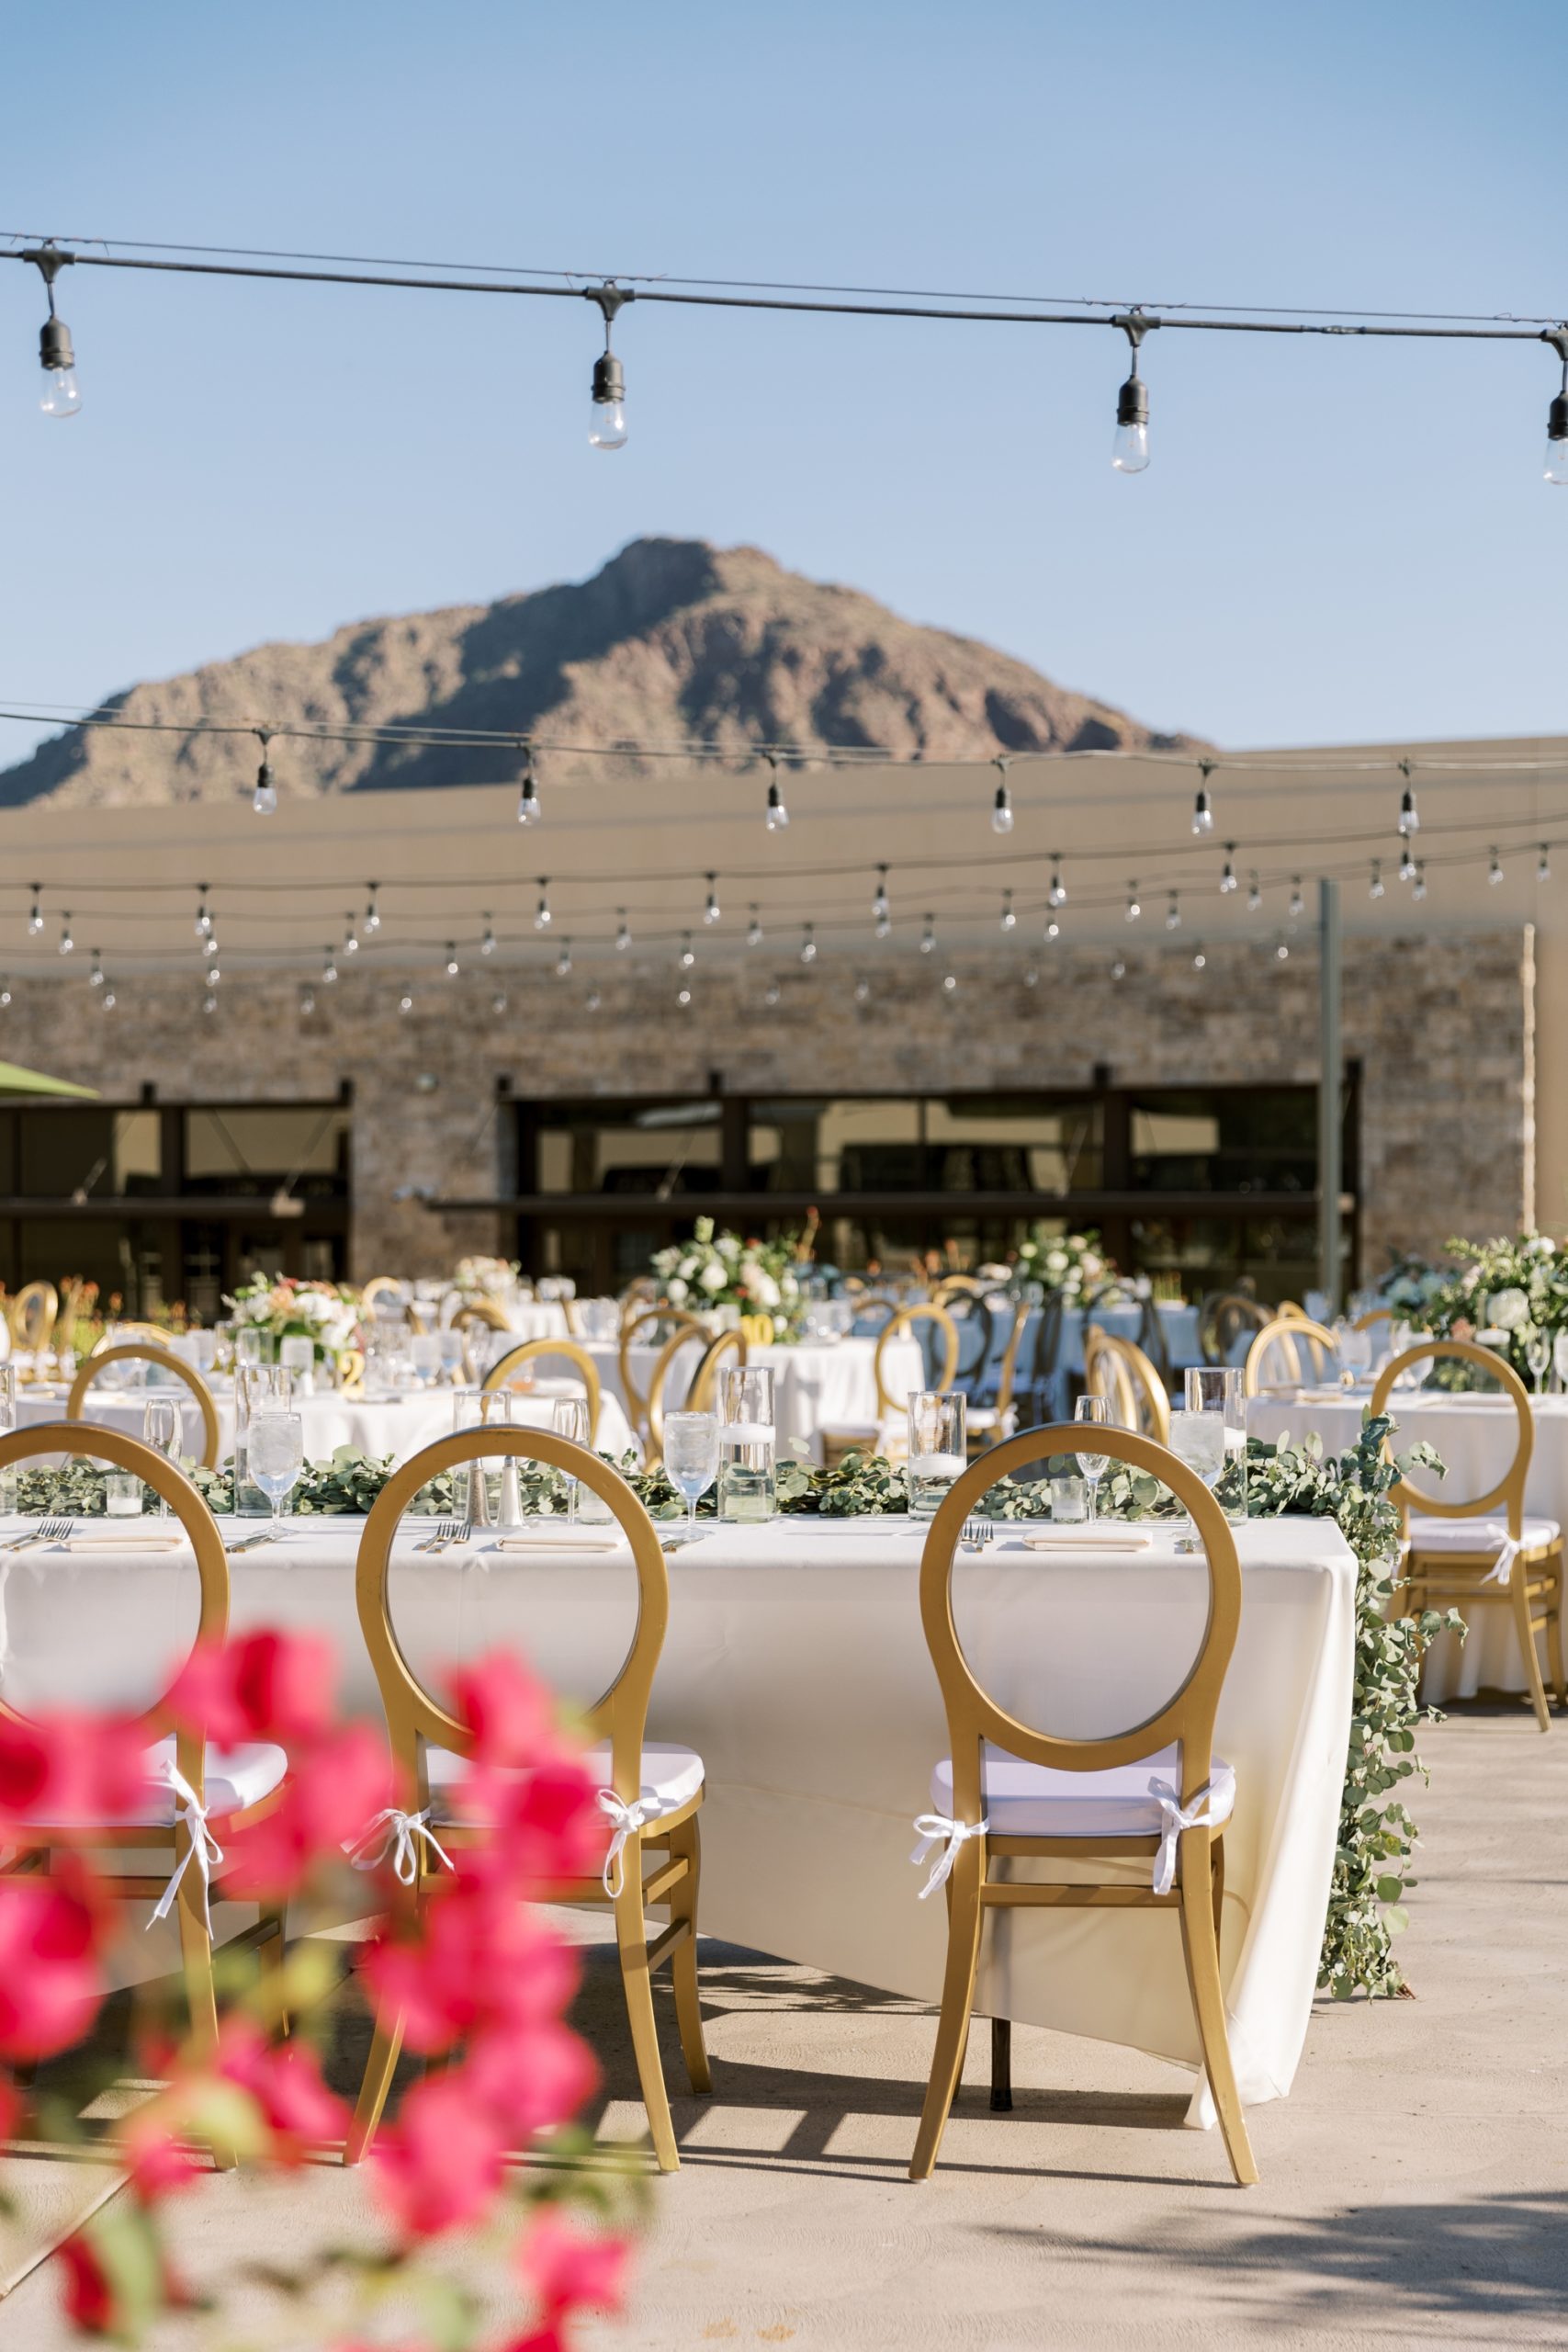 The outdoor reception setup at the Camelback Inn in Scottsdale wedding